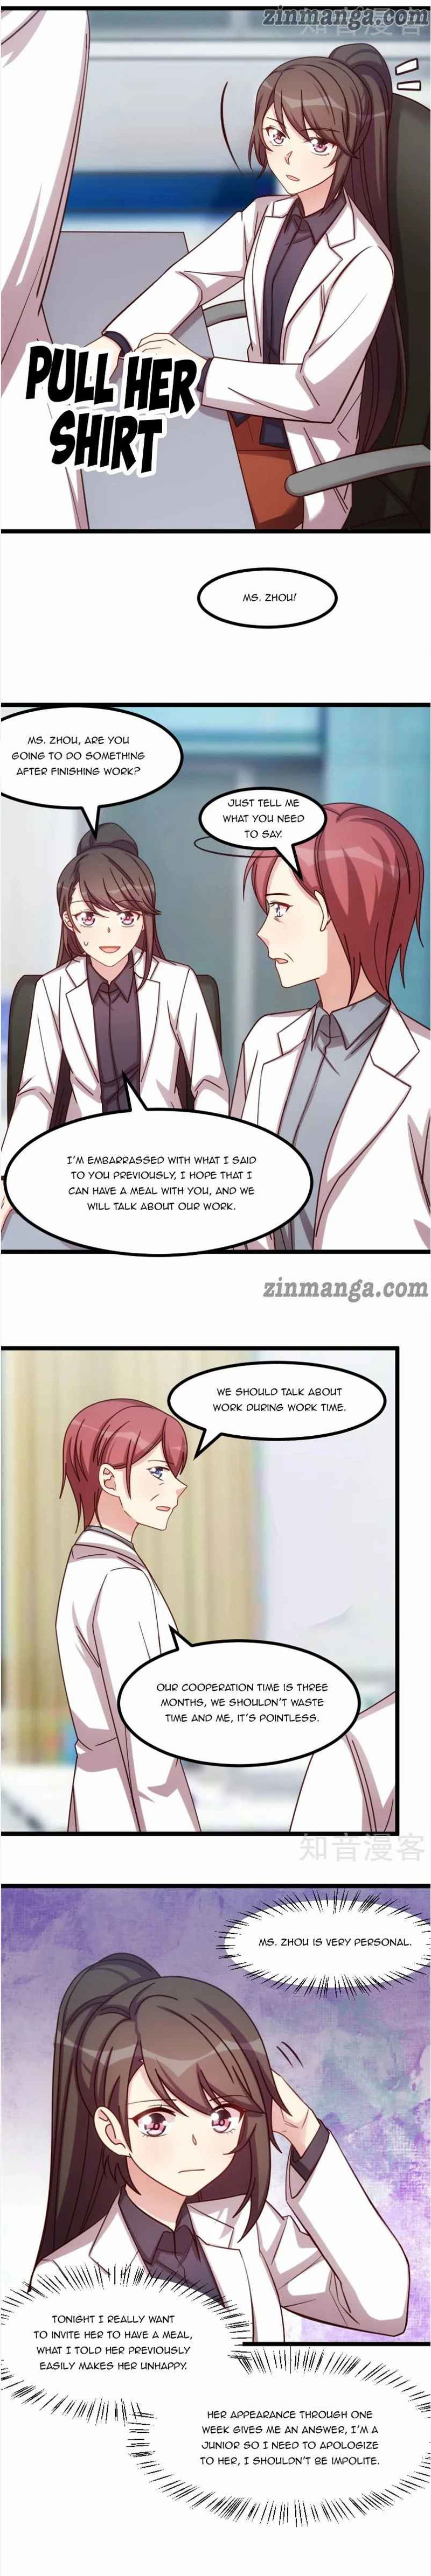 CEO's Sudden Proposal Chapter 216 page 2